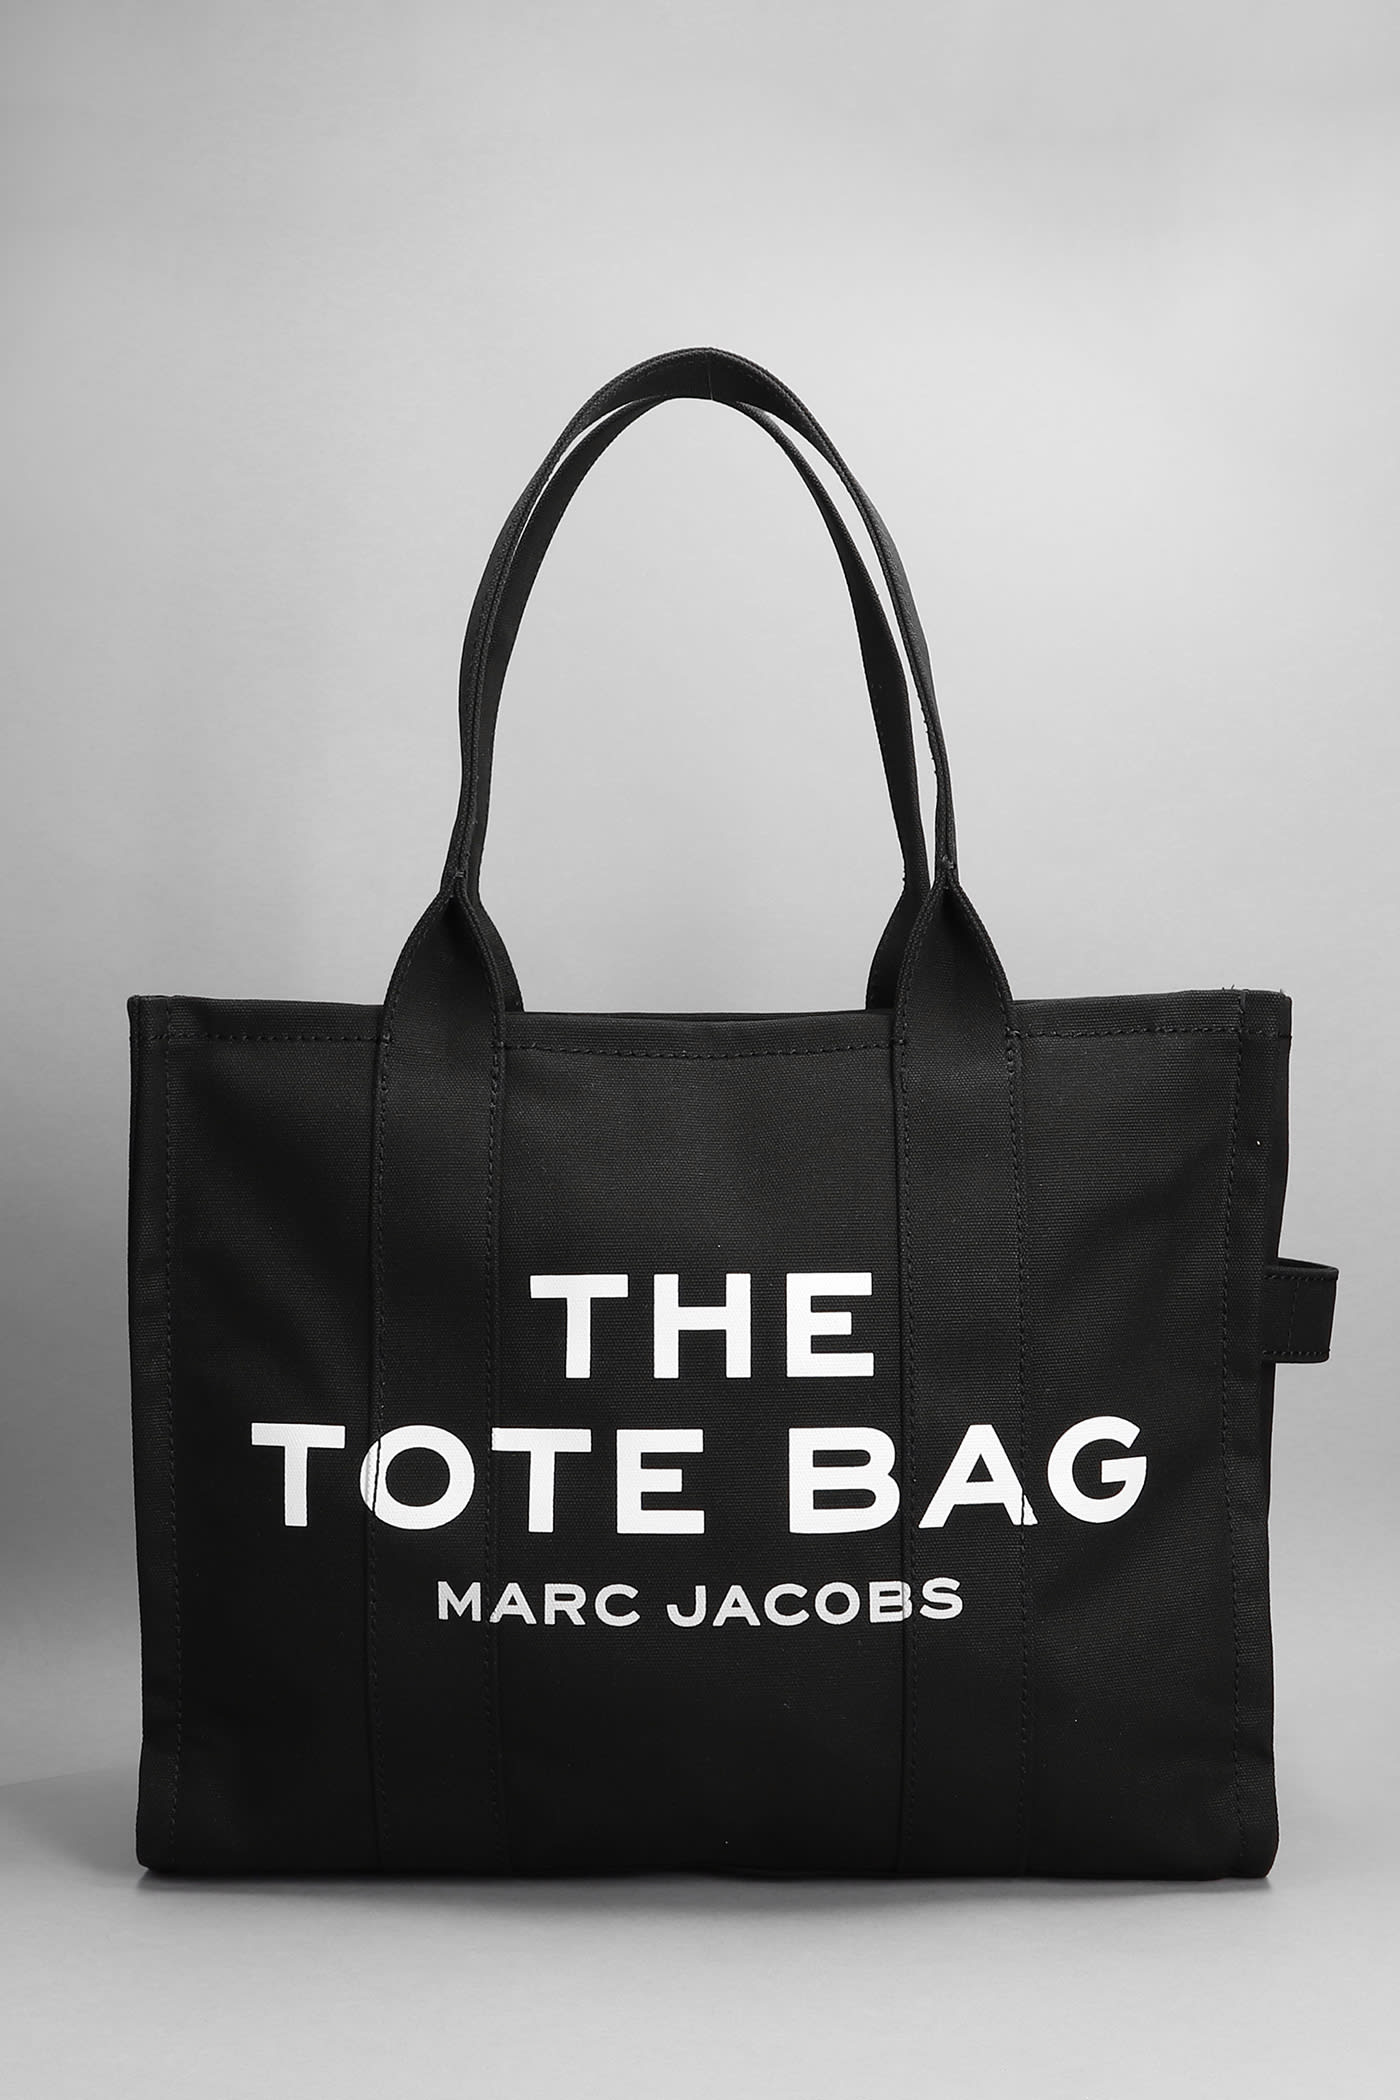 Marc Jacobs Hand Bag In Black Canvas